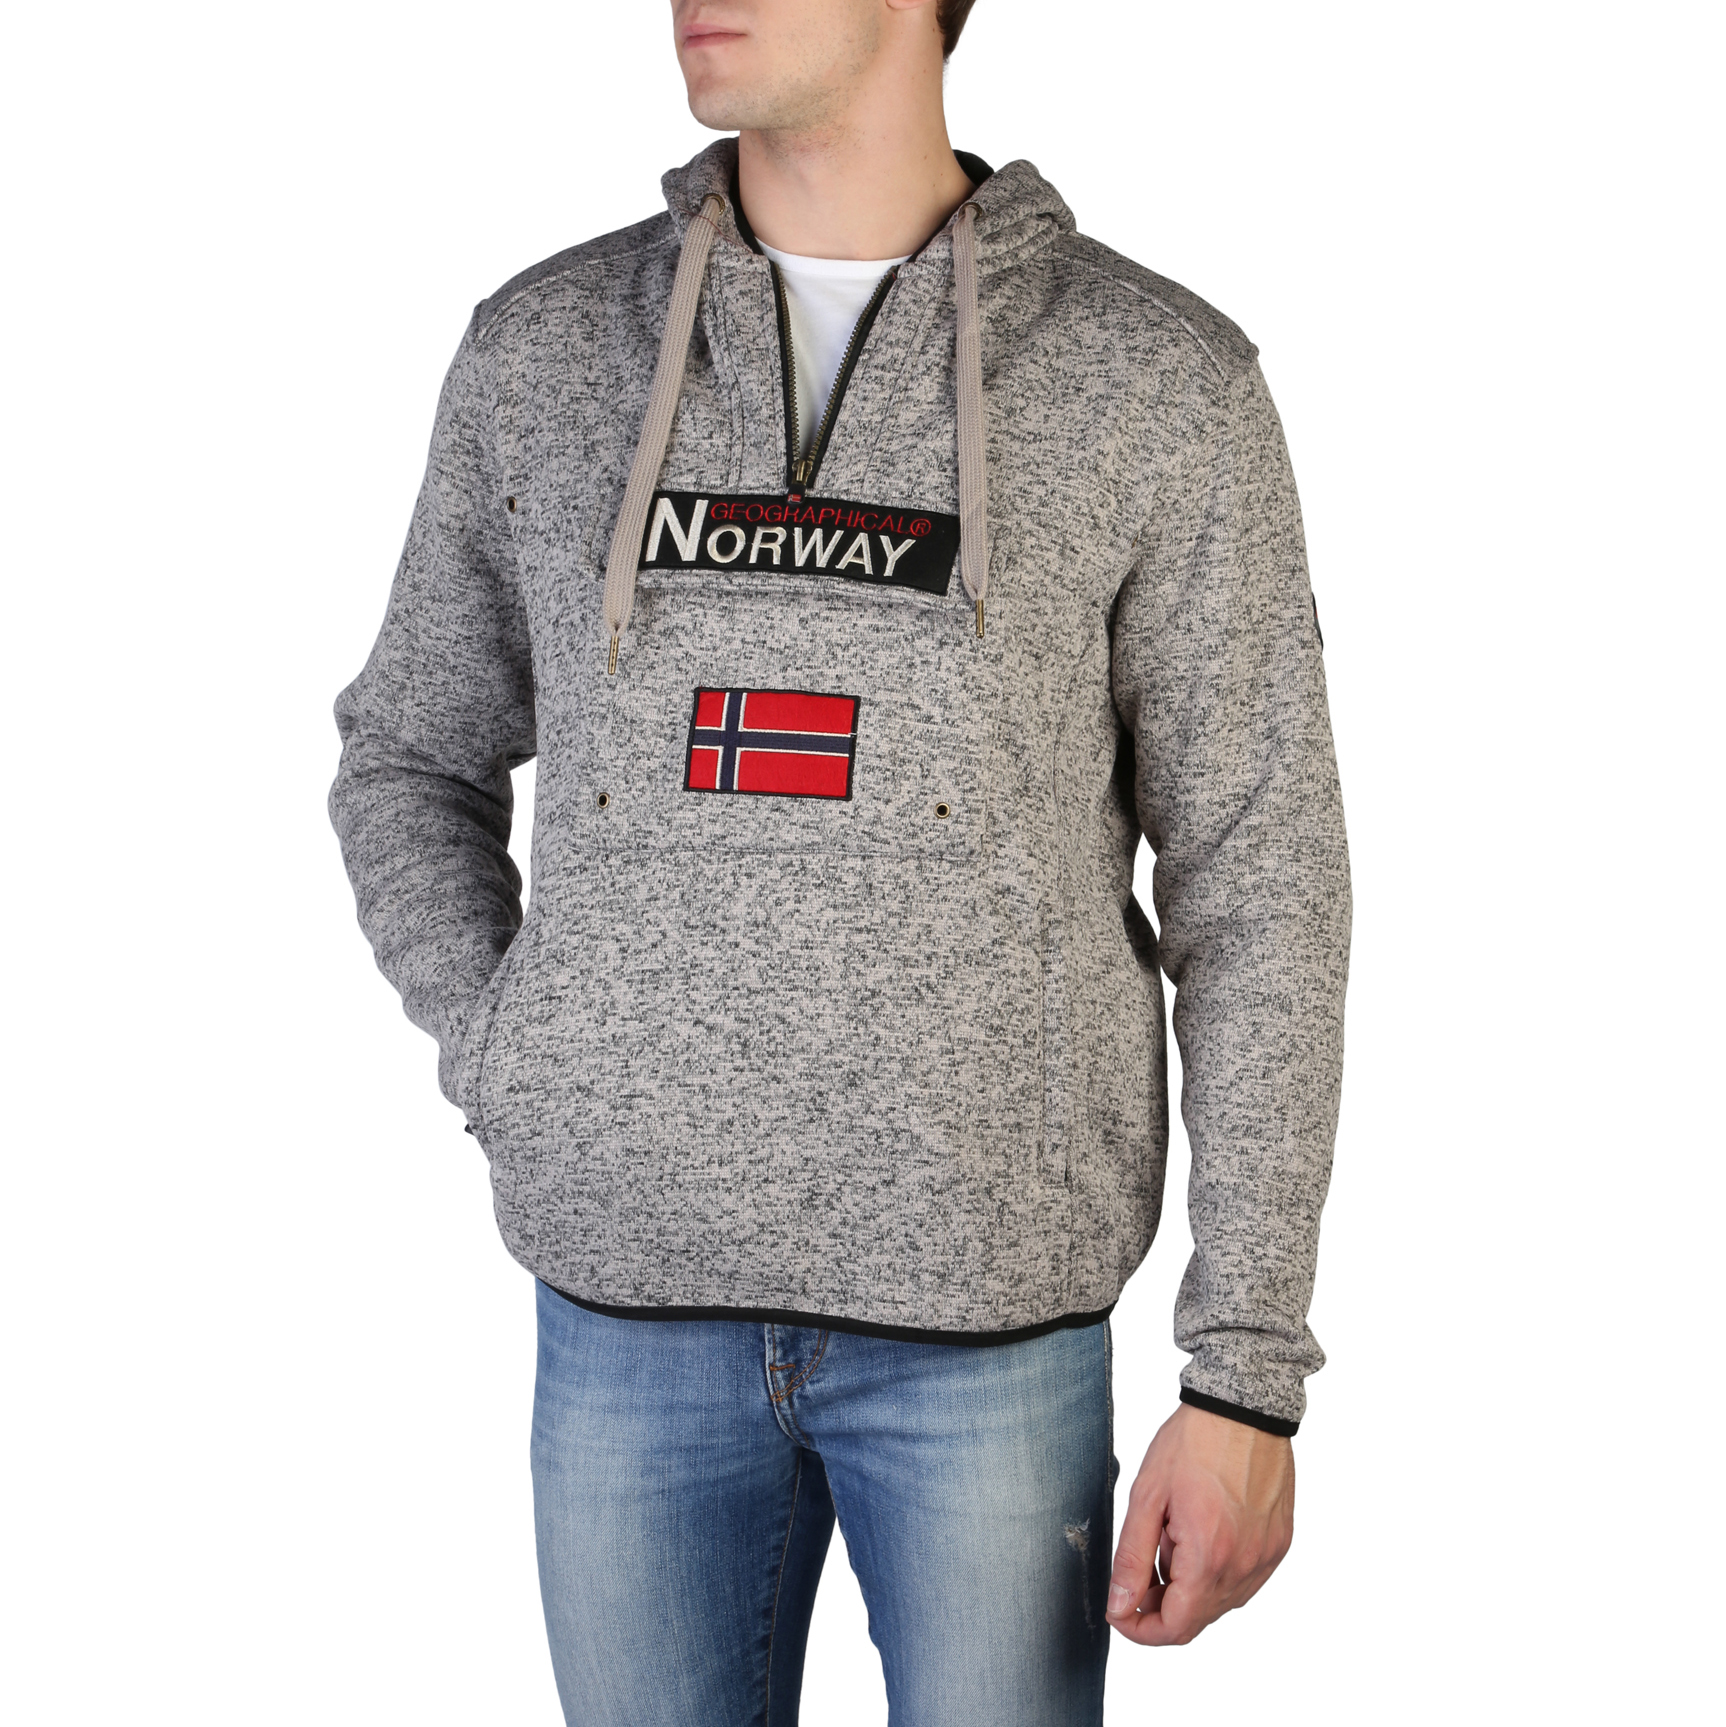 Geographical Norway Upclass man